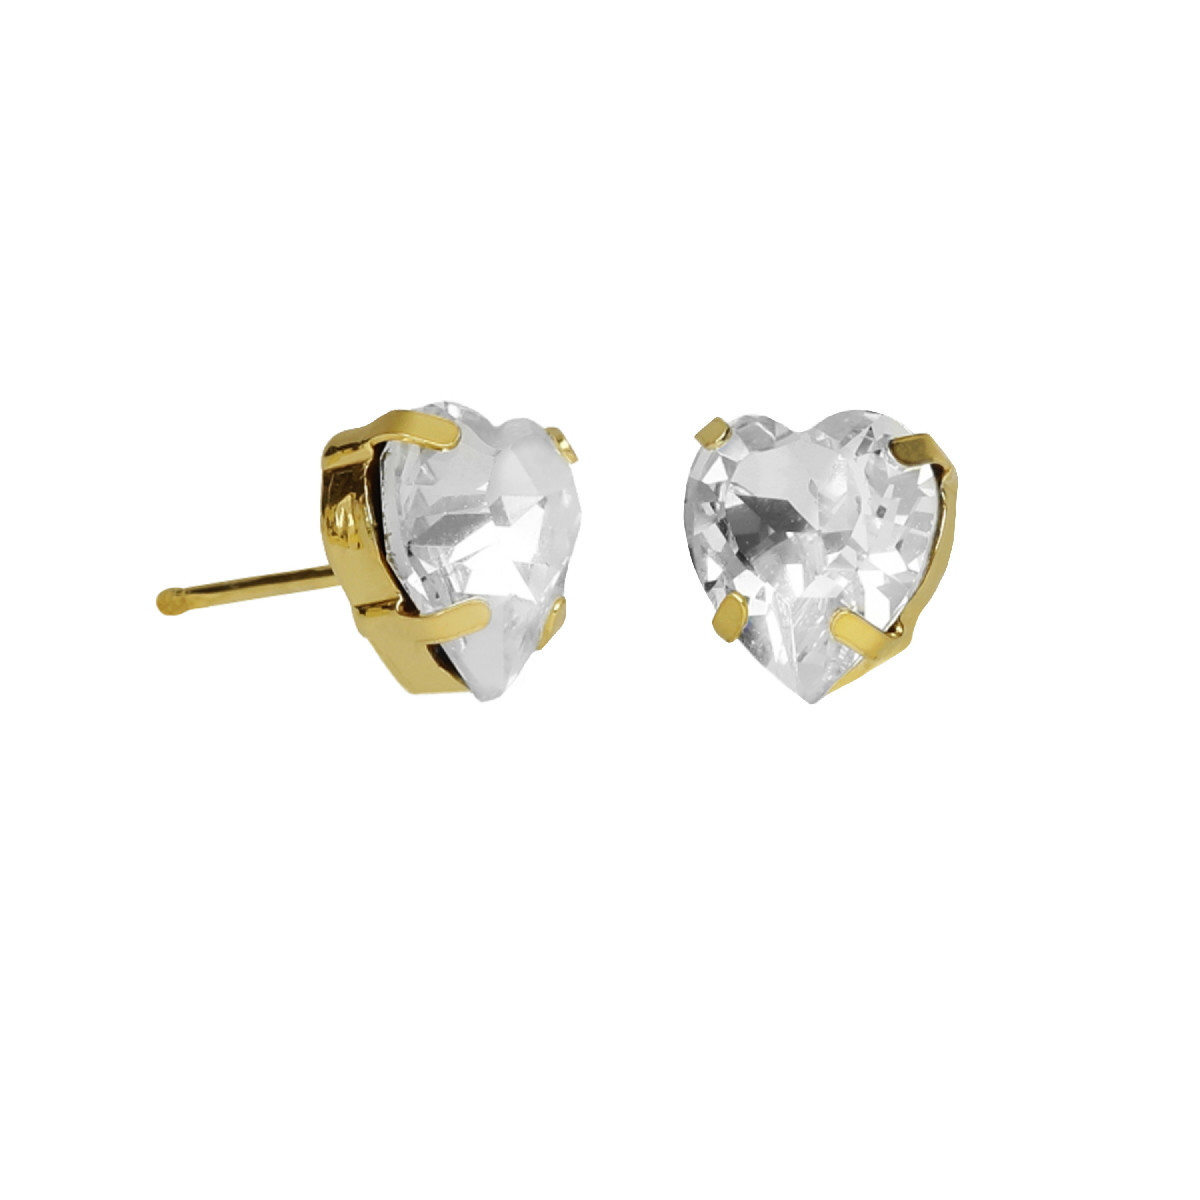 Well-loved gold-plated stud earrings with white crystal in heart shape